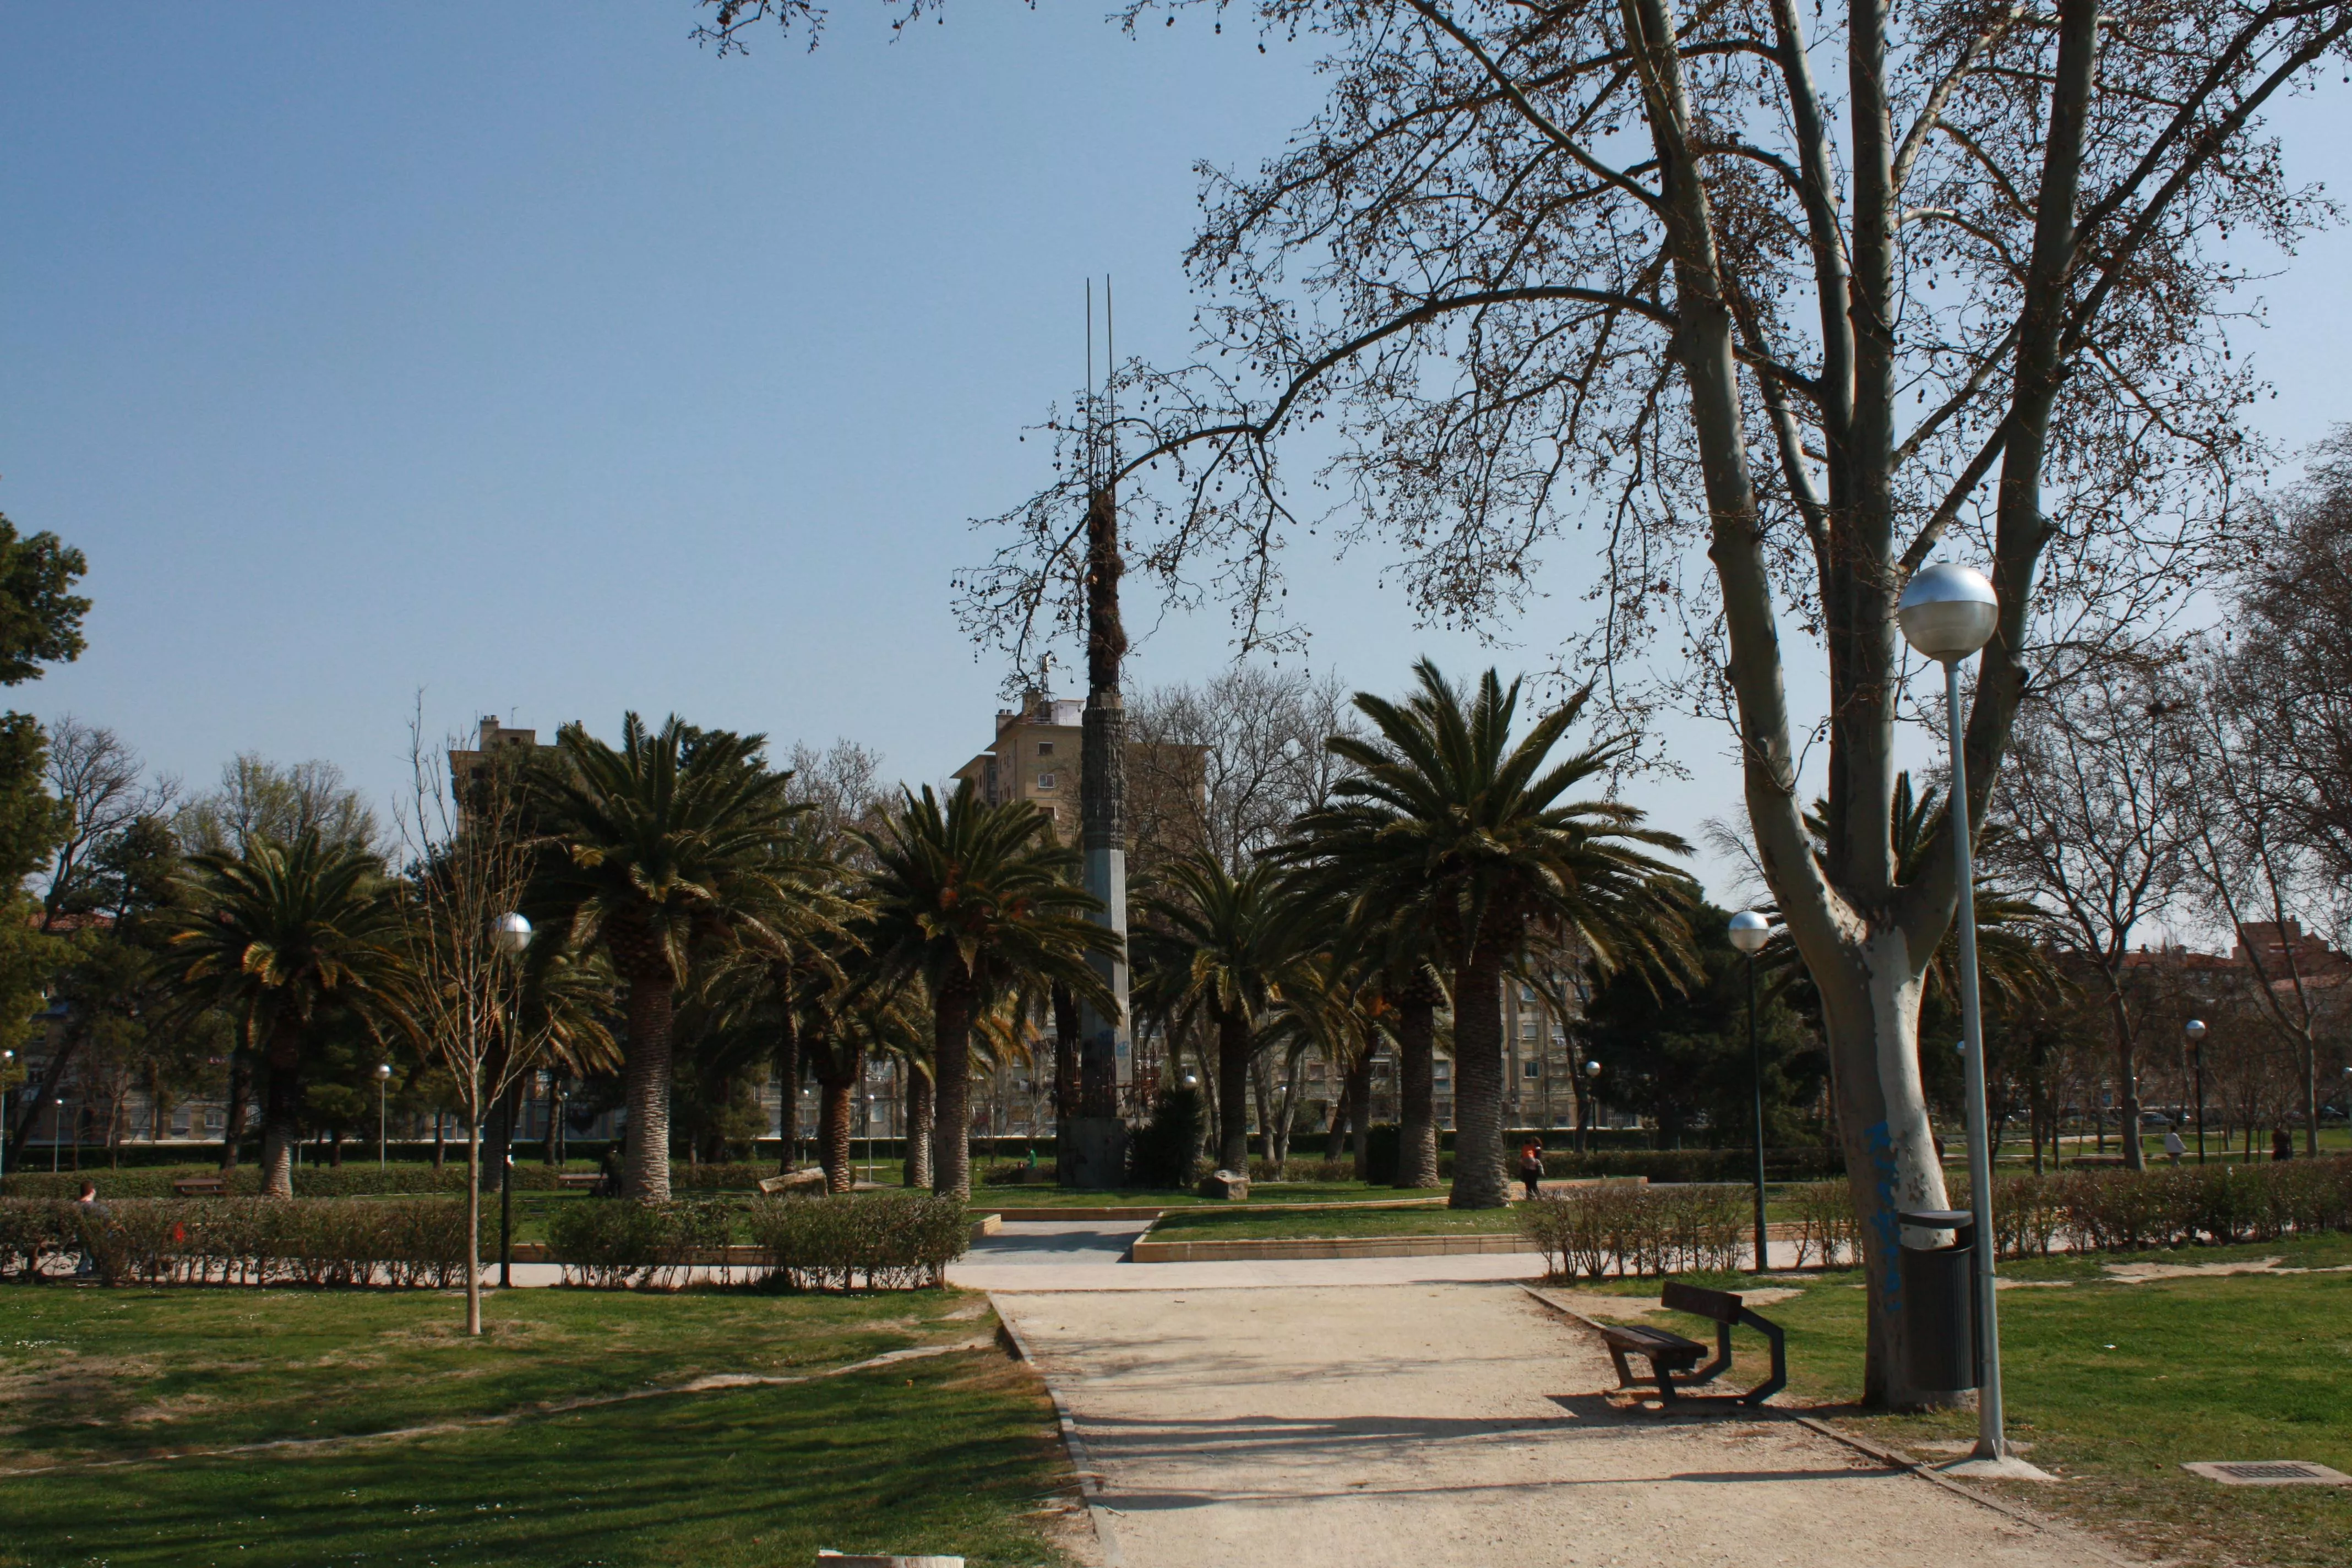 Tio Jorge Park in Spain, Europe | Parks - Rated 3.5